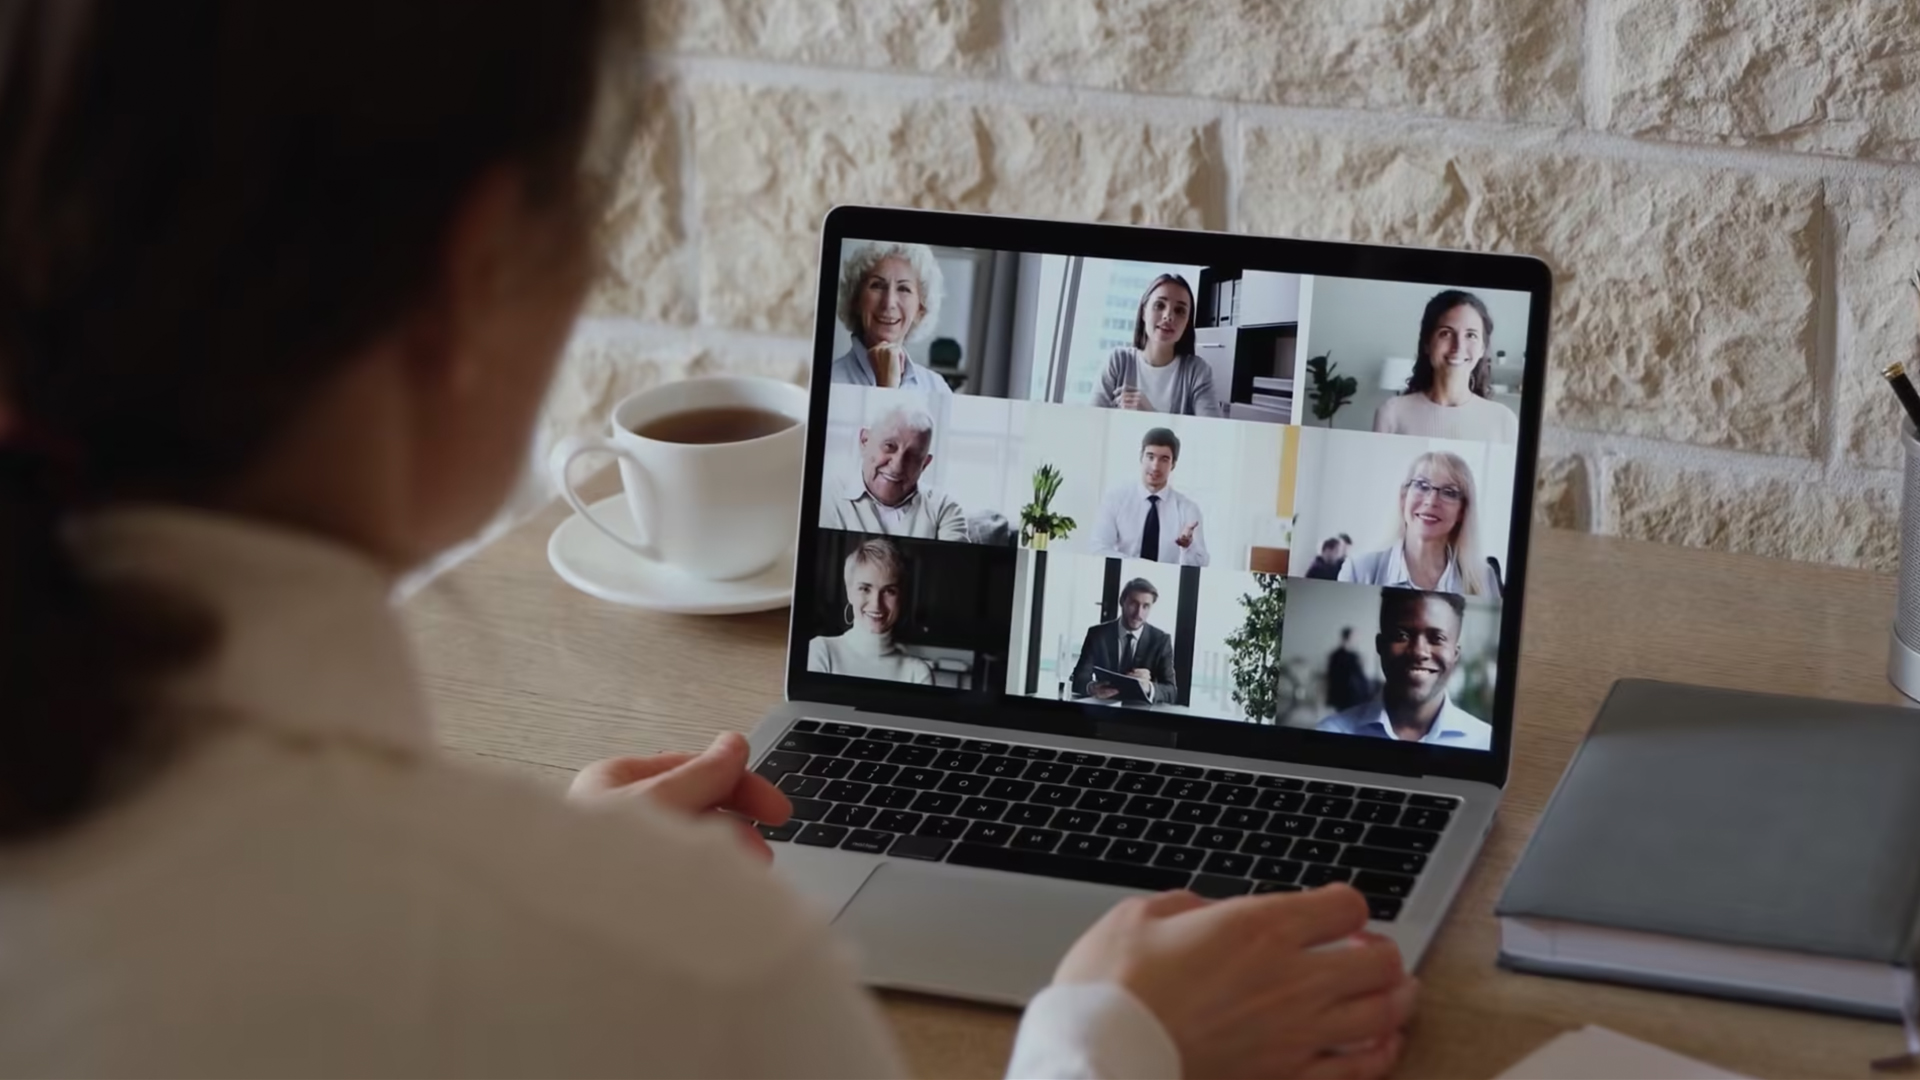 Woman talking on laptop video call with 9 people on her screen